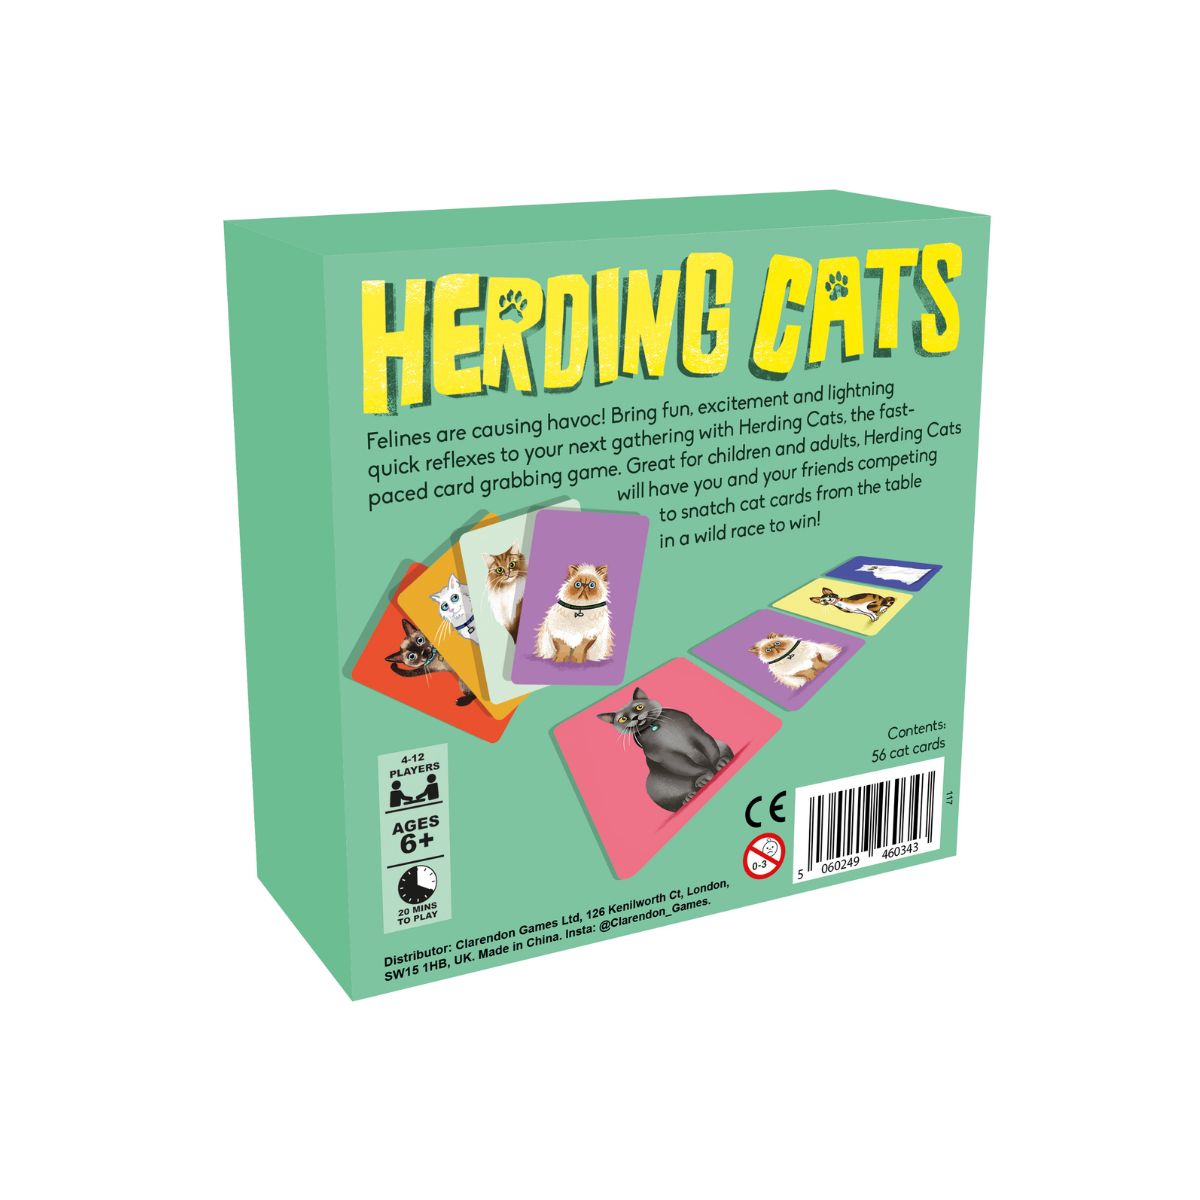 Herding Cats Gifts & Merchandise for Sale